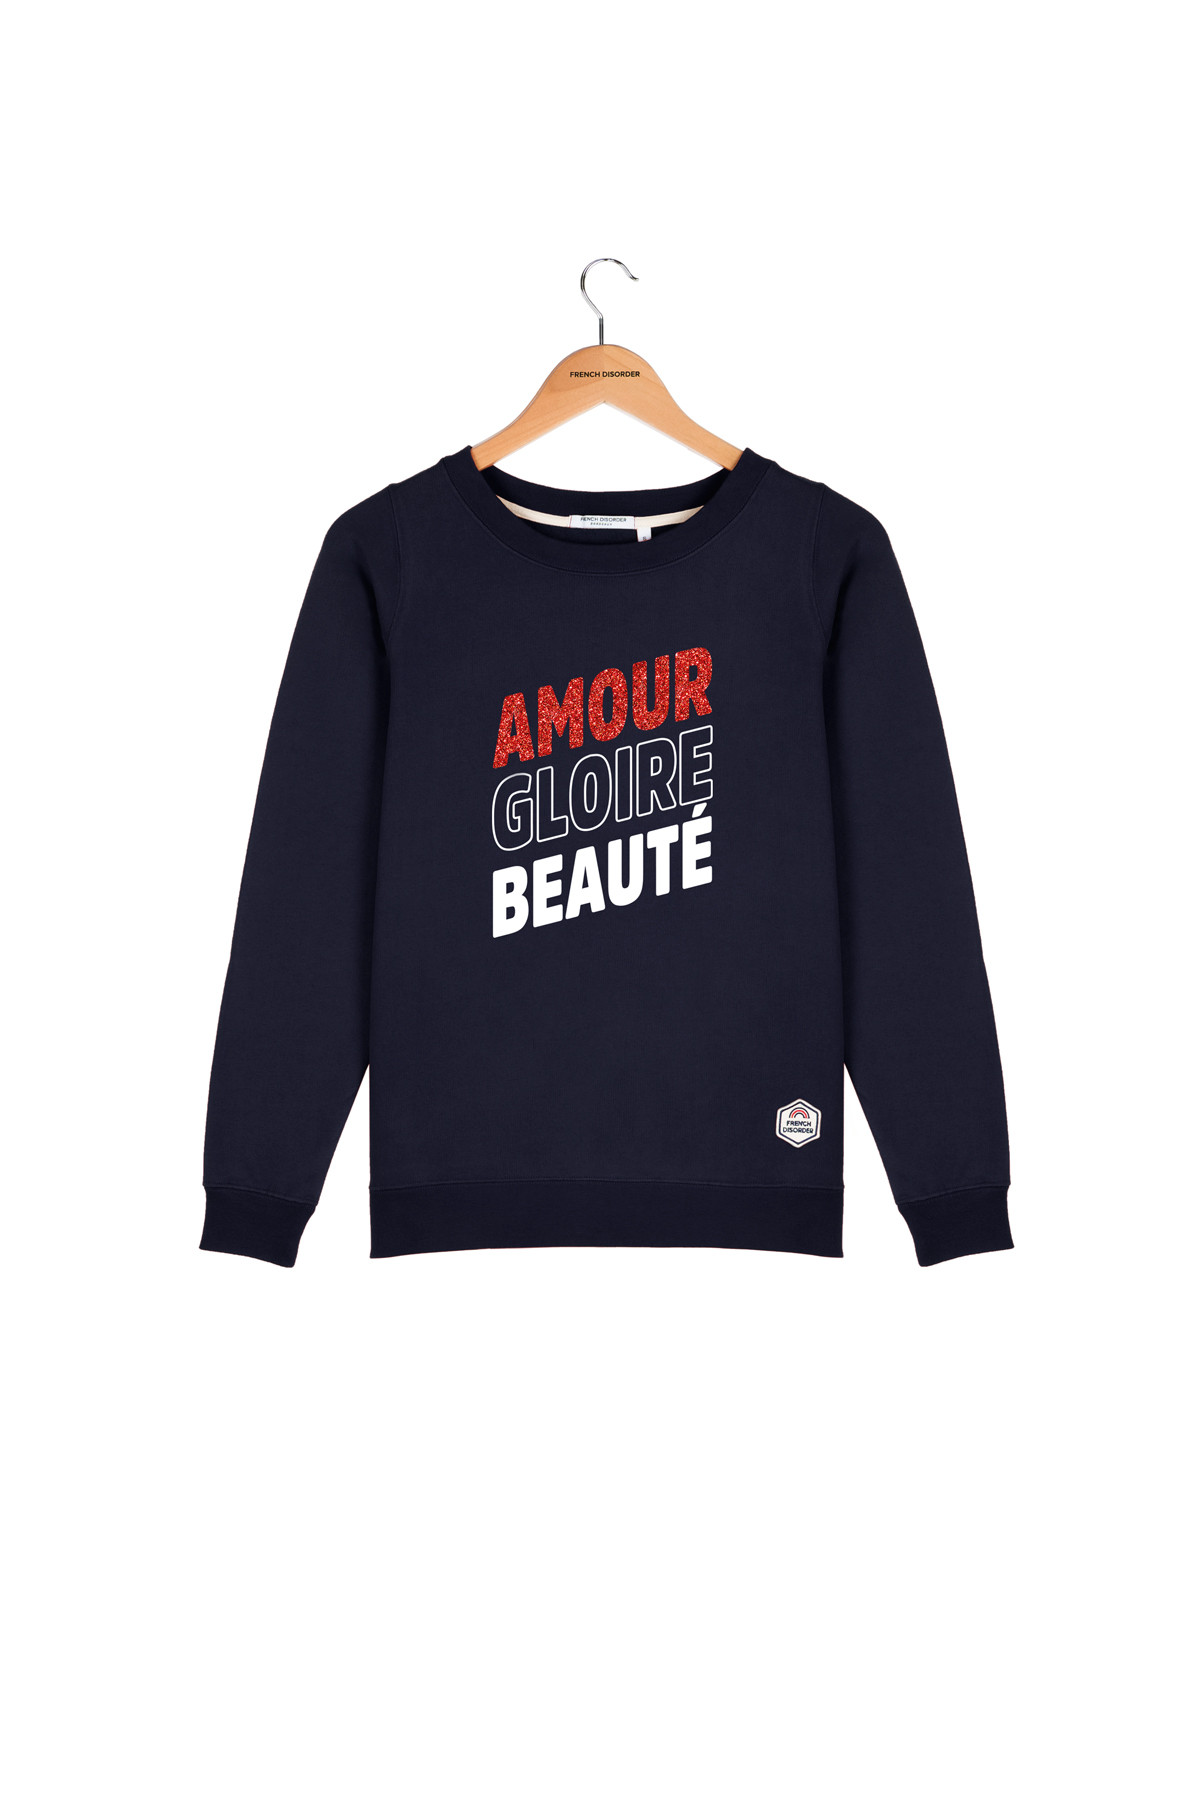 Sweat AMOUR GLOIRE BEAUTE French Disorder